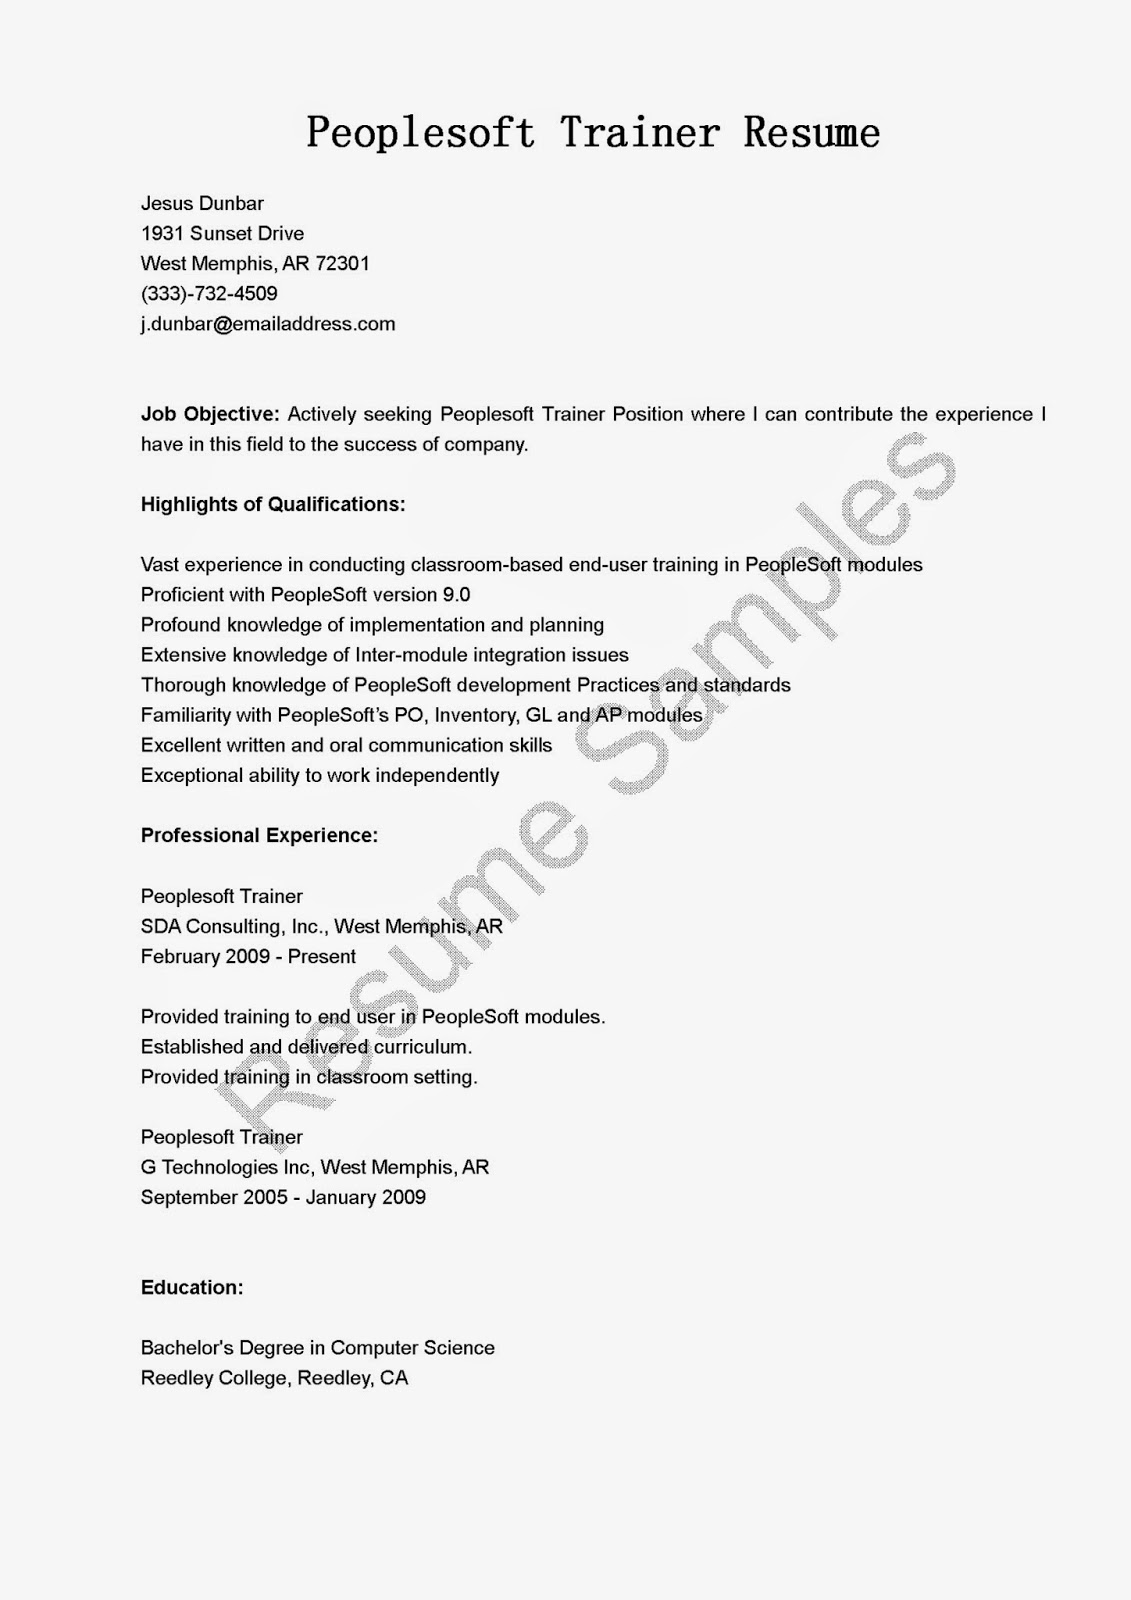 Excellent communication and interpersonal skills resume